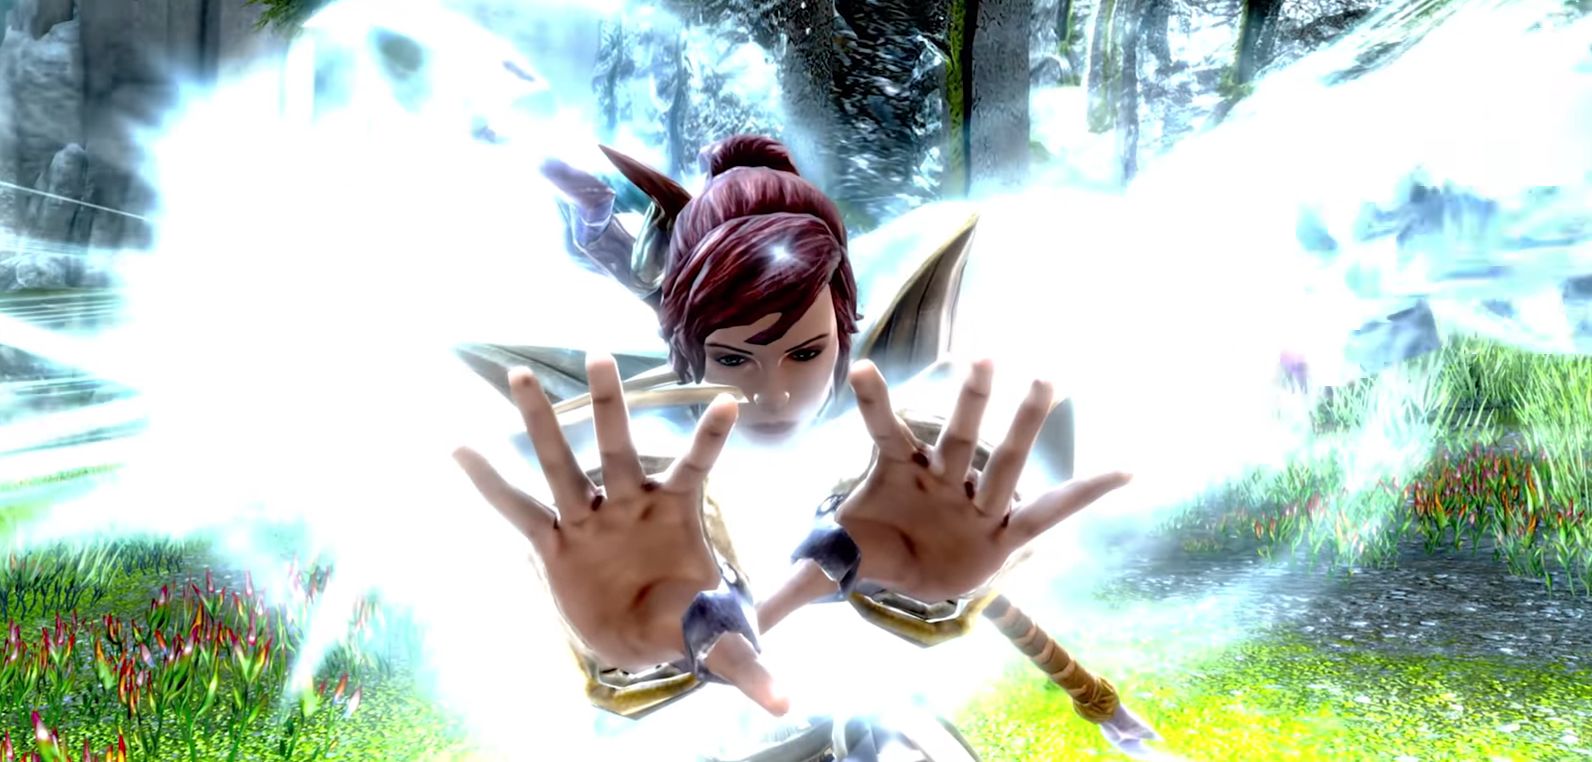 Image for The path of Sorcery detailed in Kingdoms of Amalur: Re-Reckoning gameplay trailer